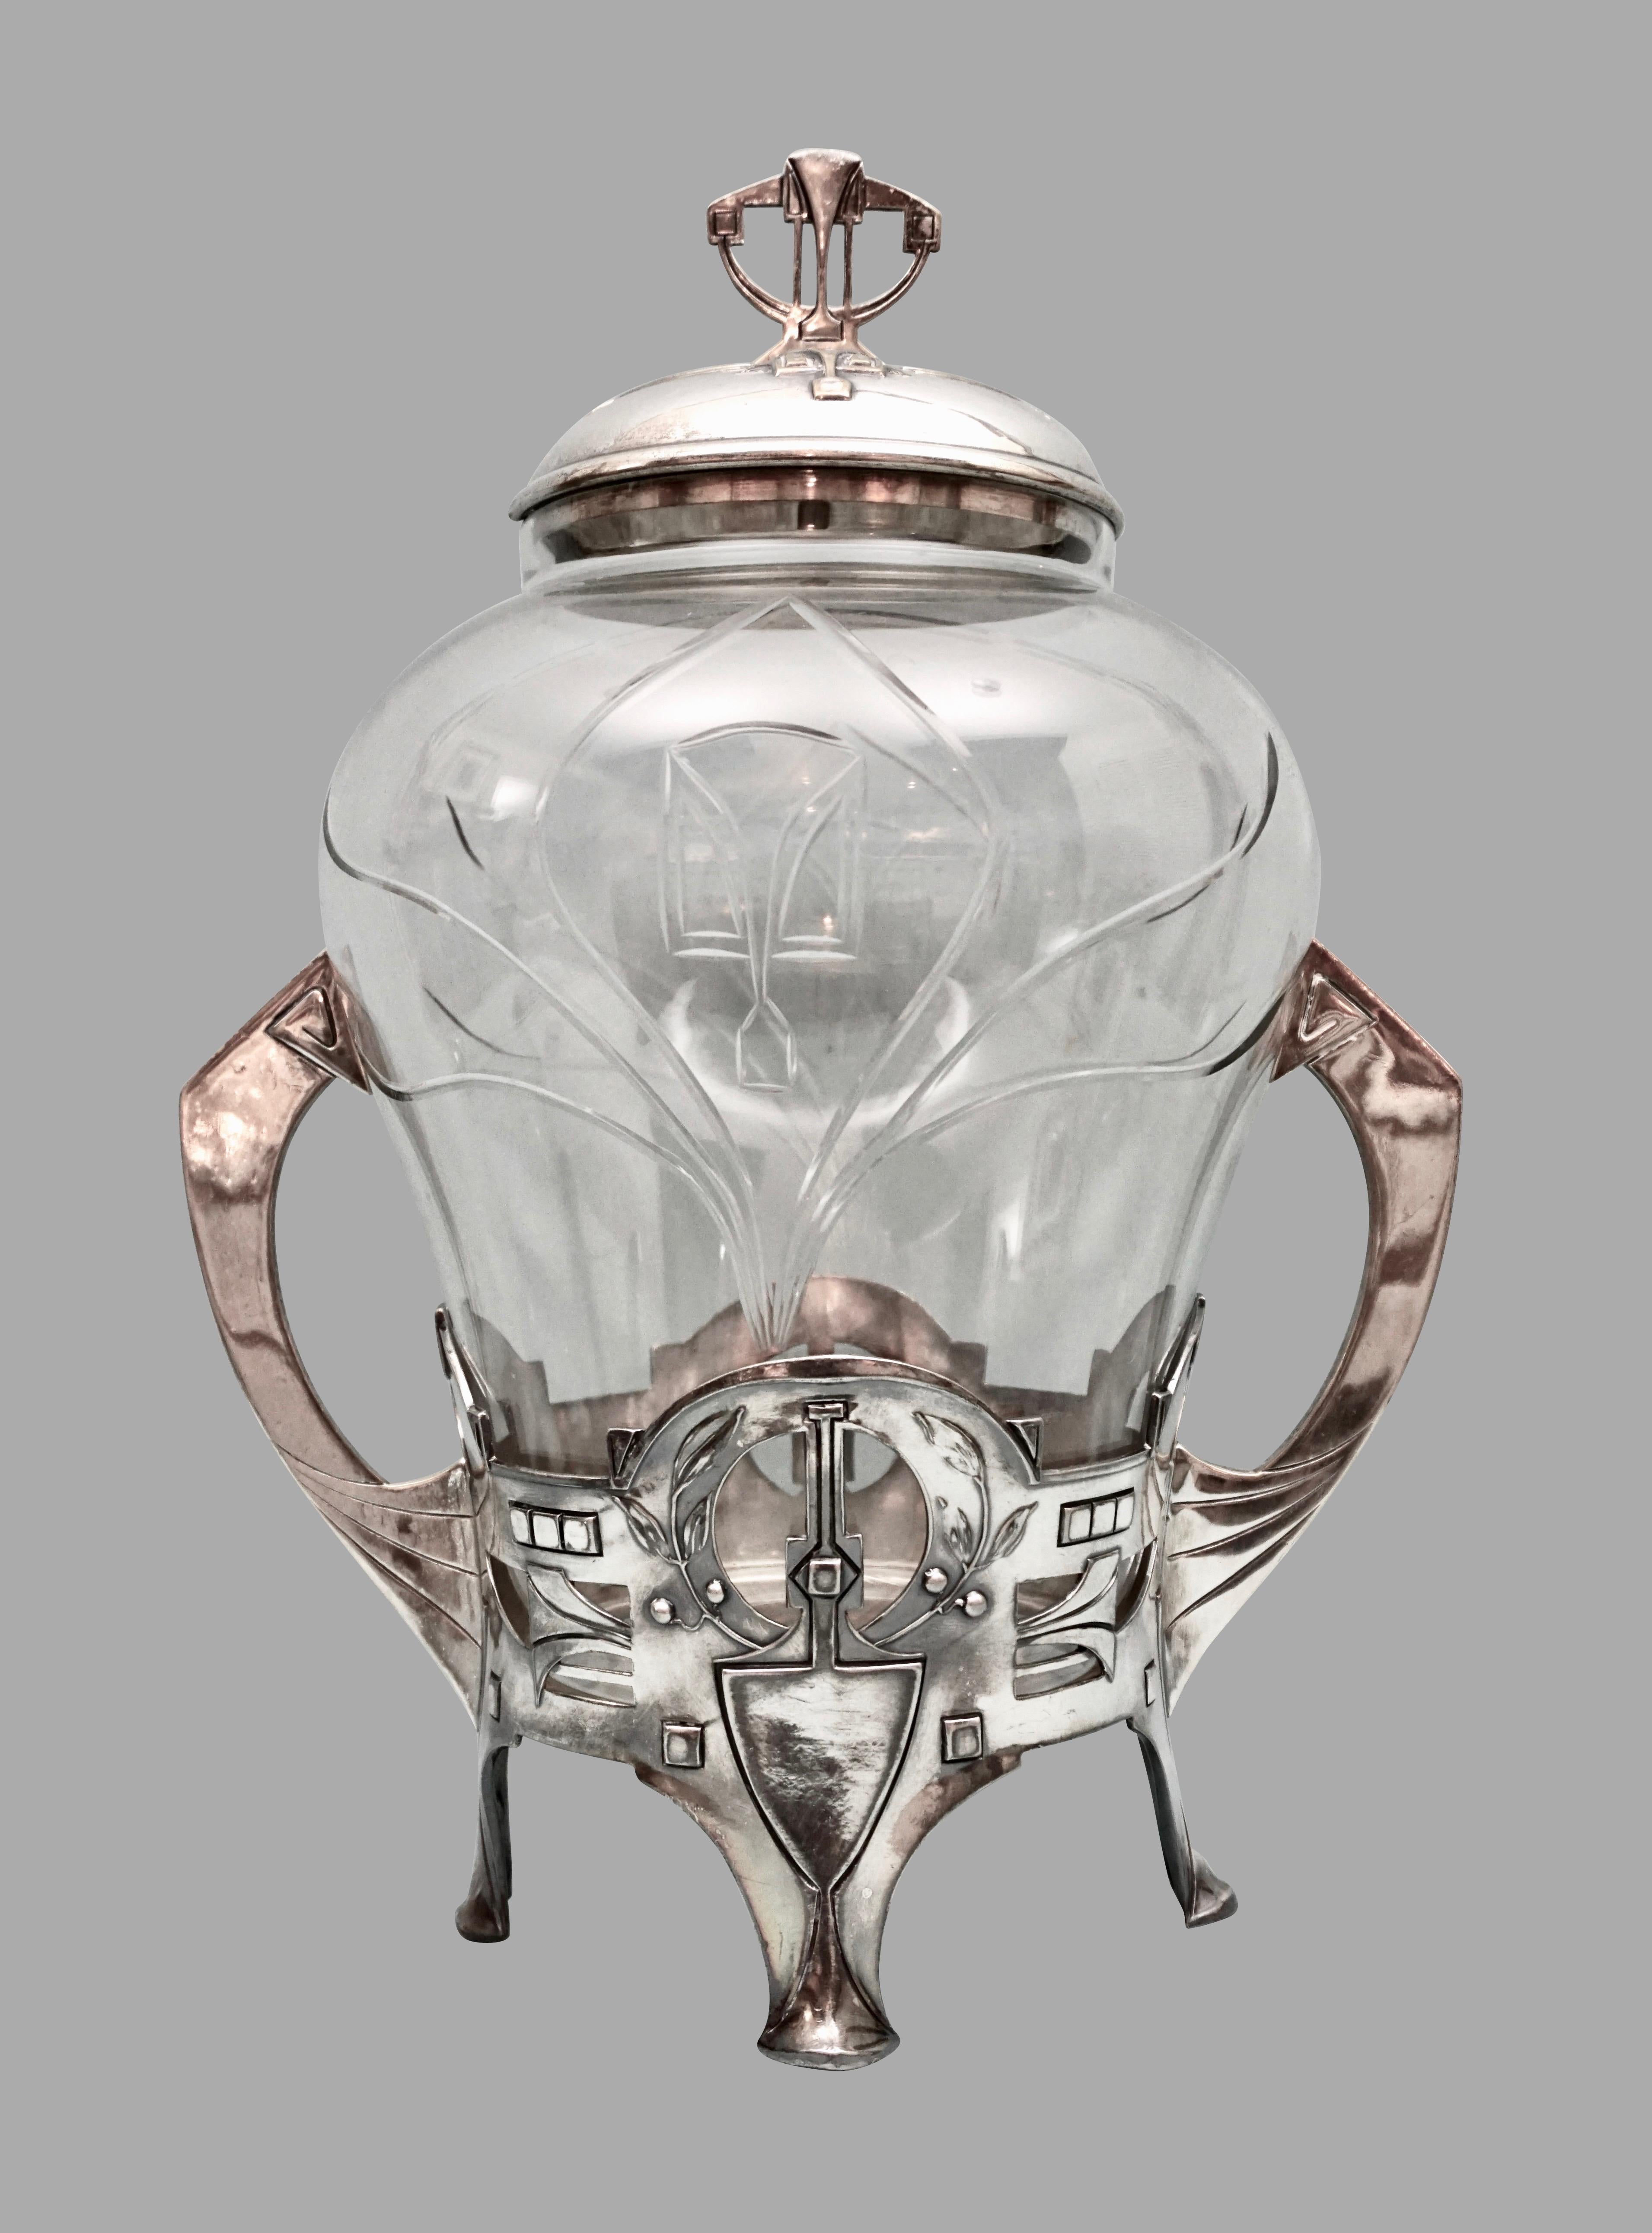 A German Jugendstil cut glass punch bowl, probably by Kayser, supported in an elaborate silver plate frame complete with its apparently original ladle with a gilded bowl. Jugendstil translates to 